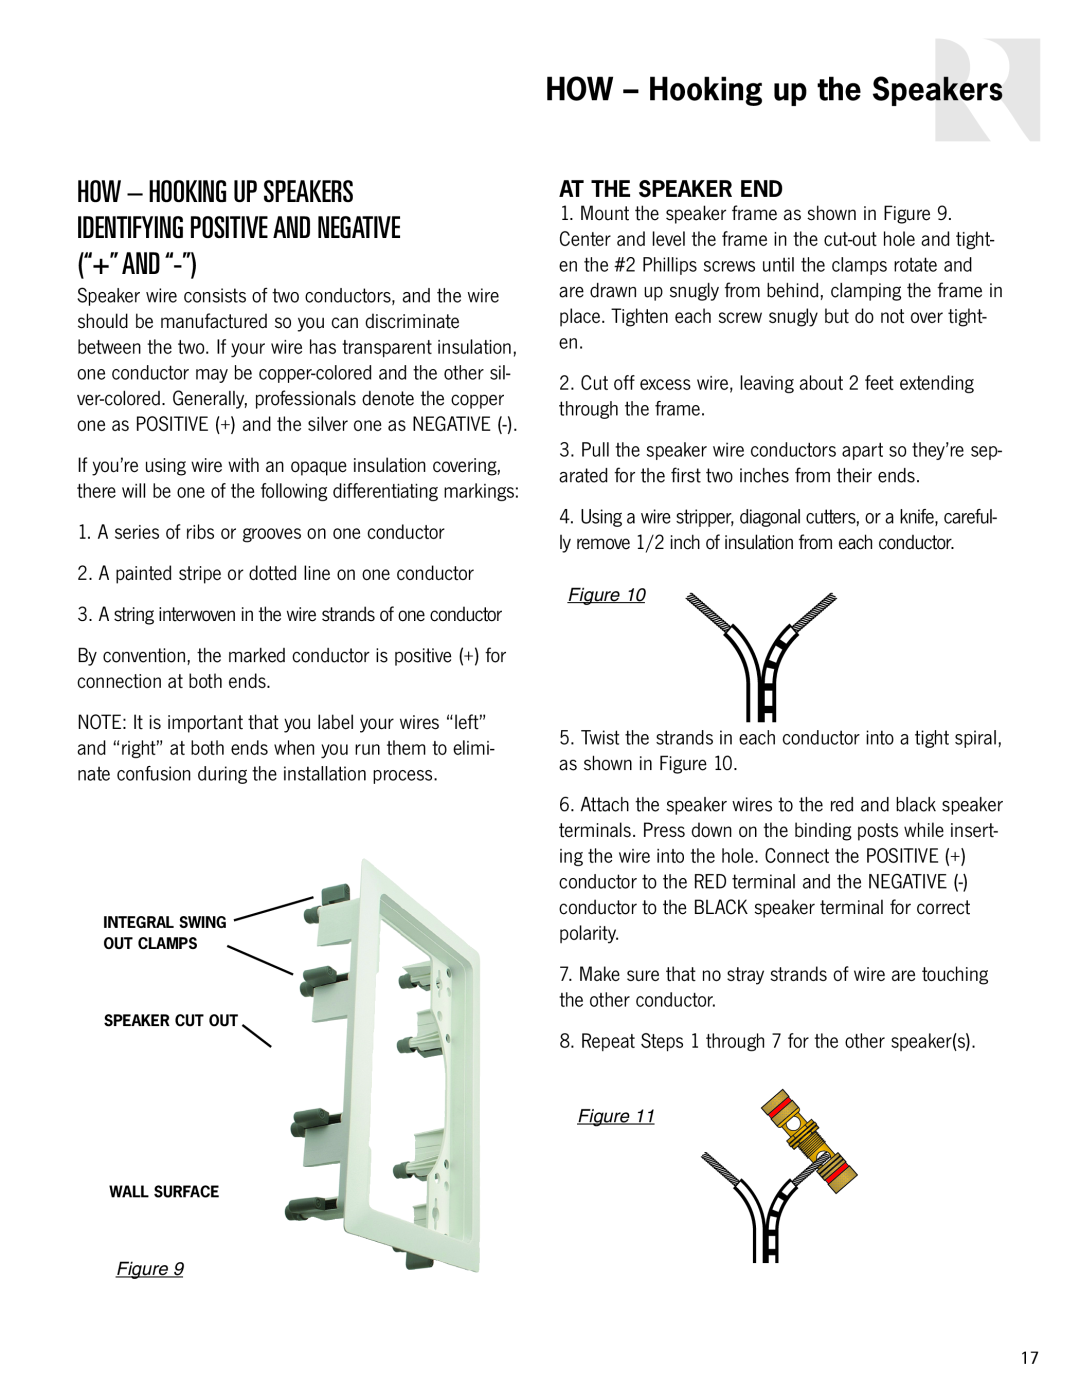 Russound Advantage Series owner manual HOW - Hooking up the Speakers, At The Speaker End 